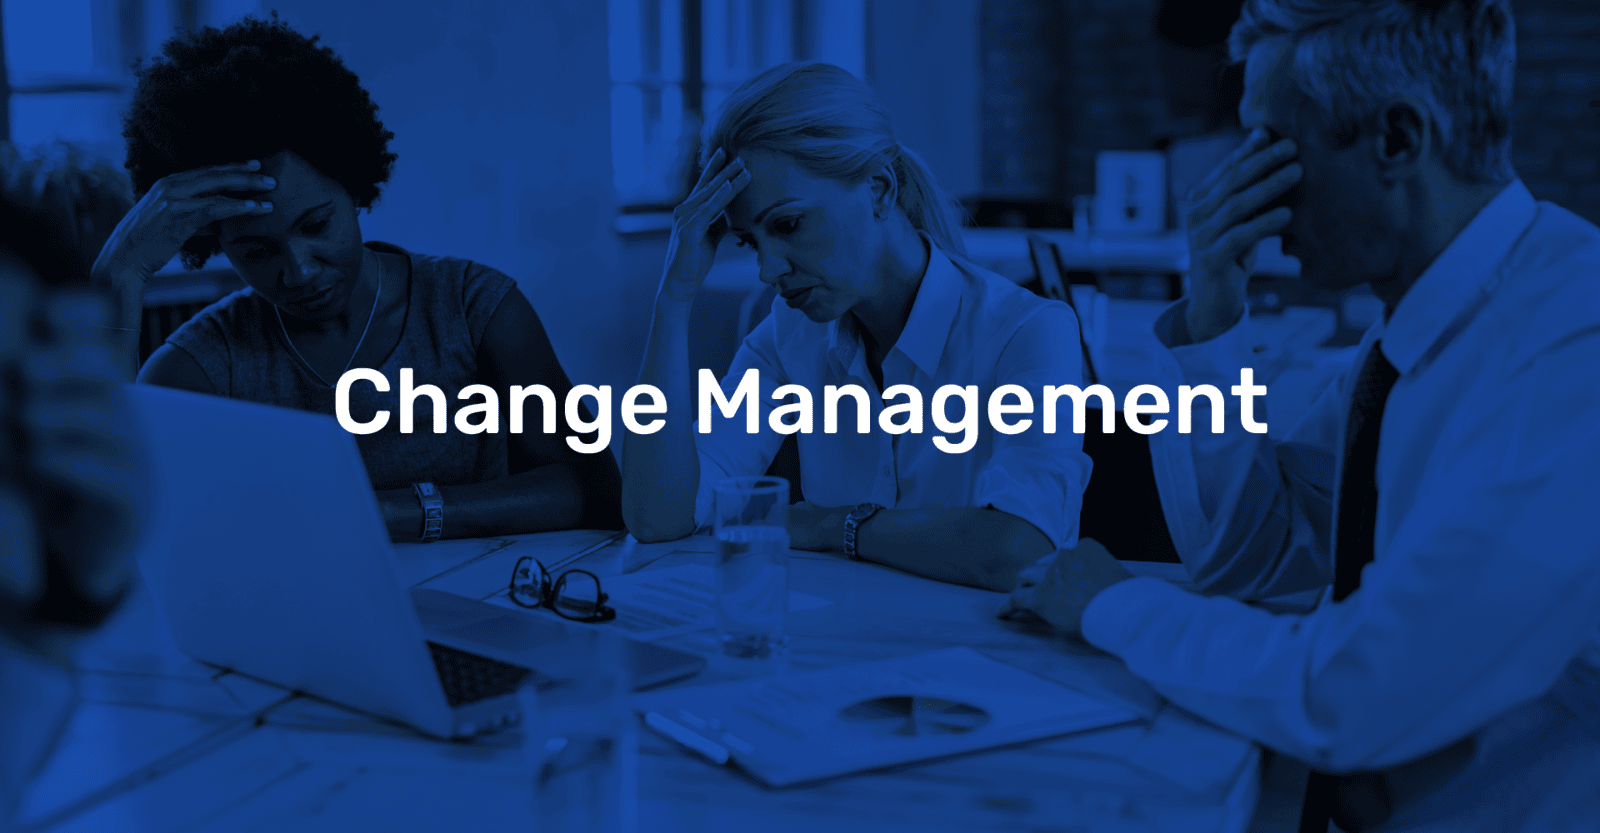 Change Management: Managing Change Properly Can Prevent ERP Implementation Failure